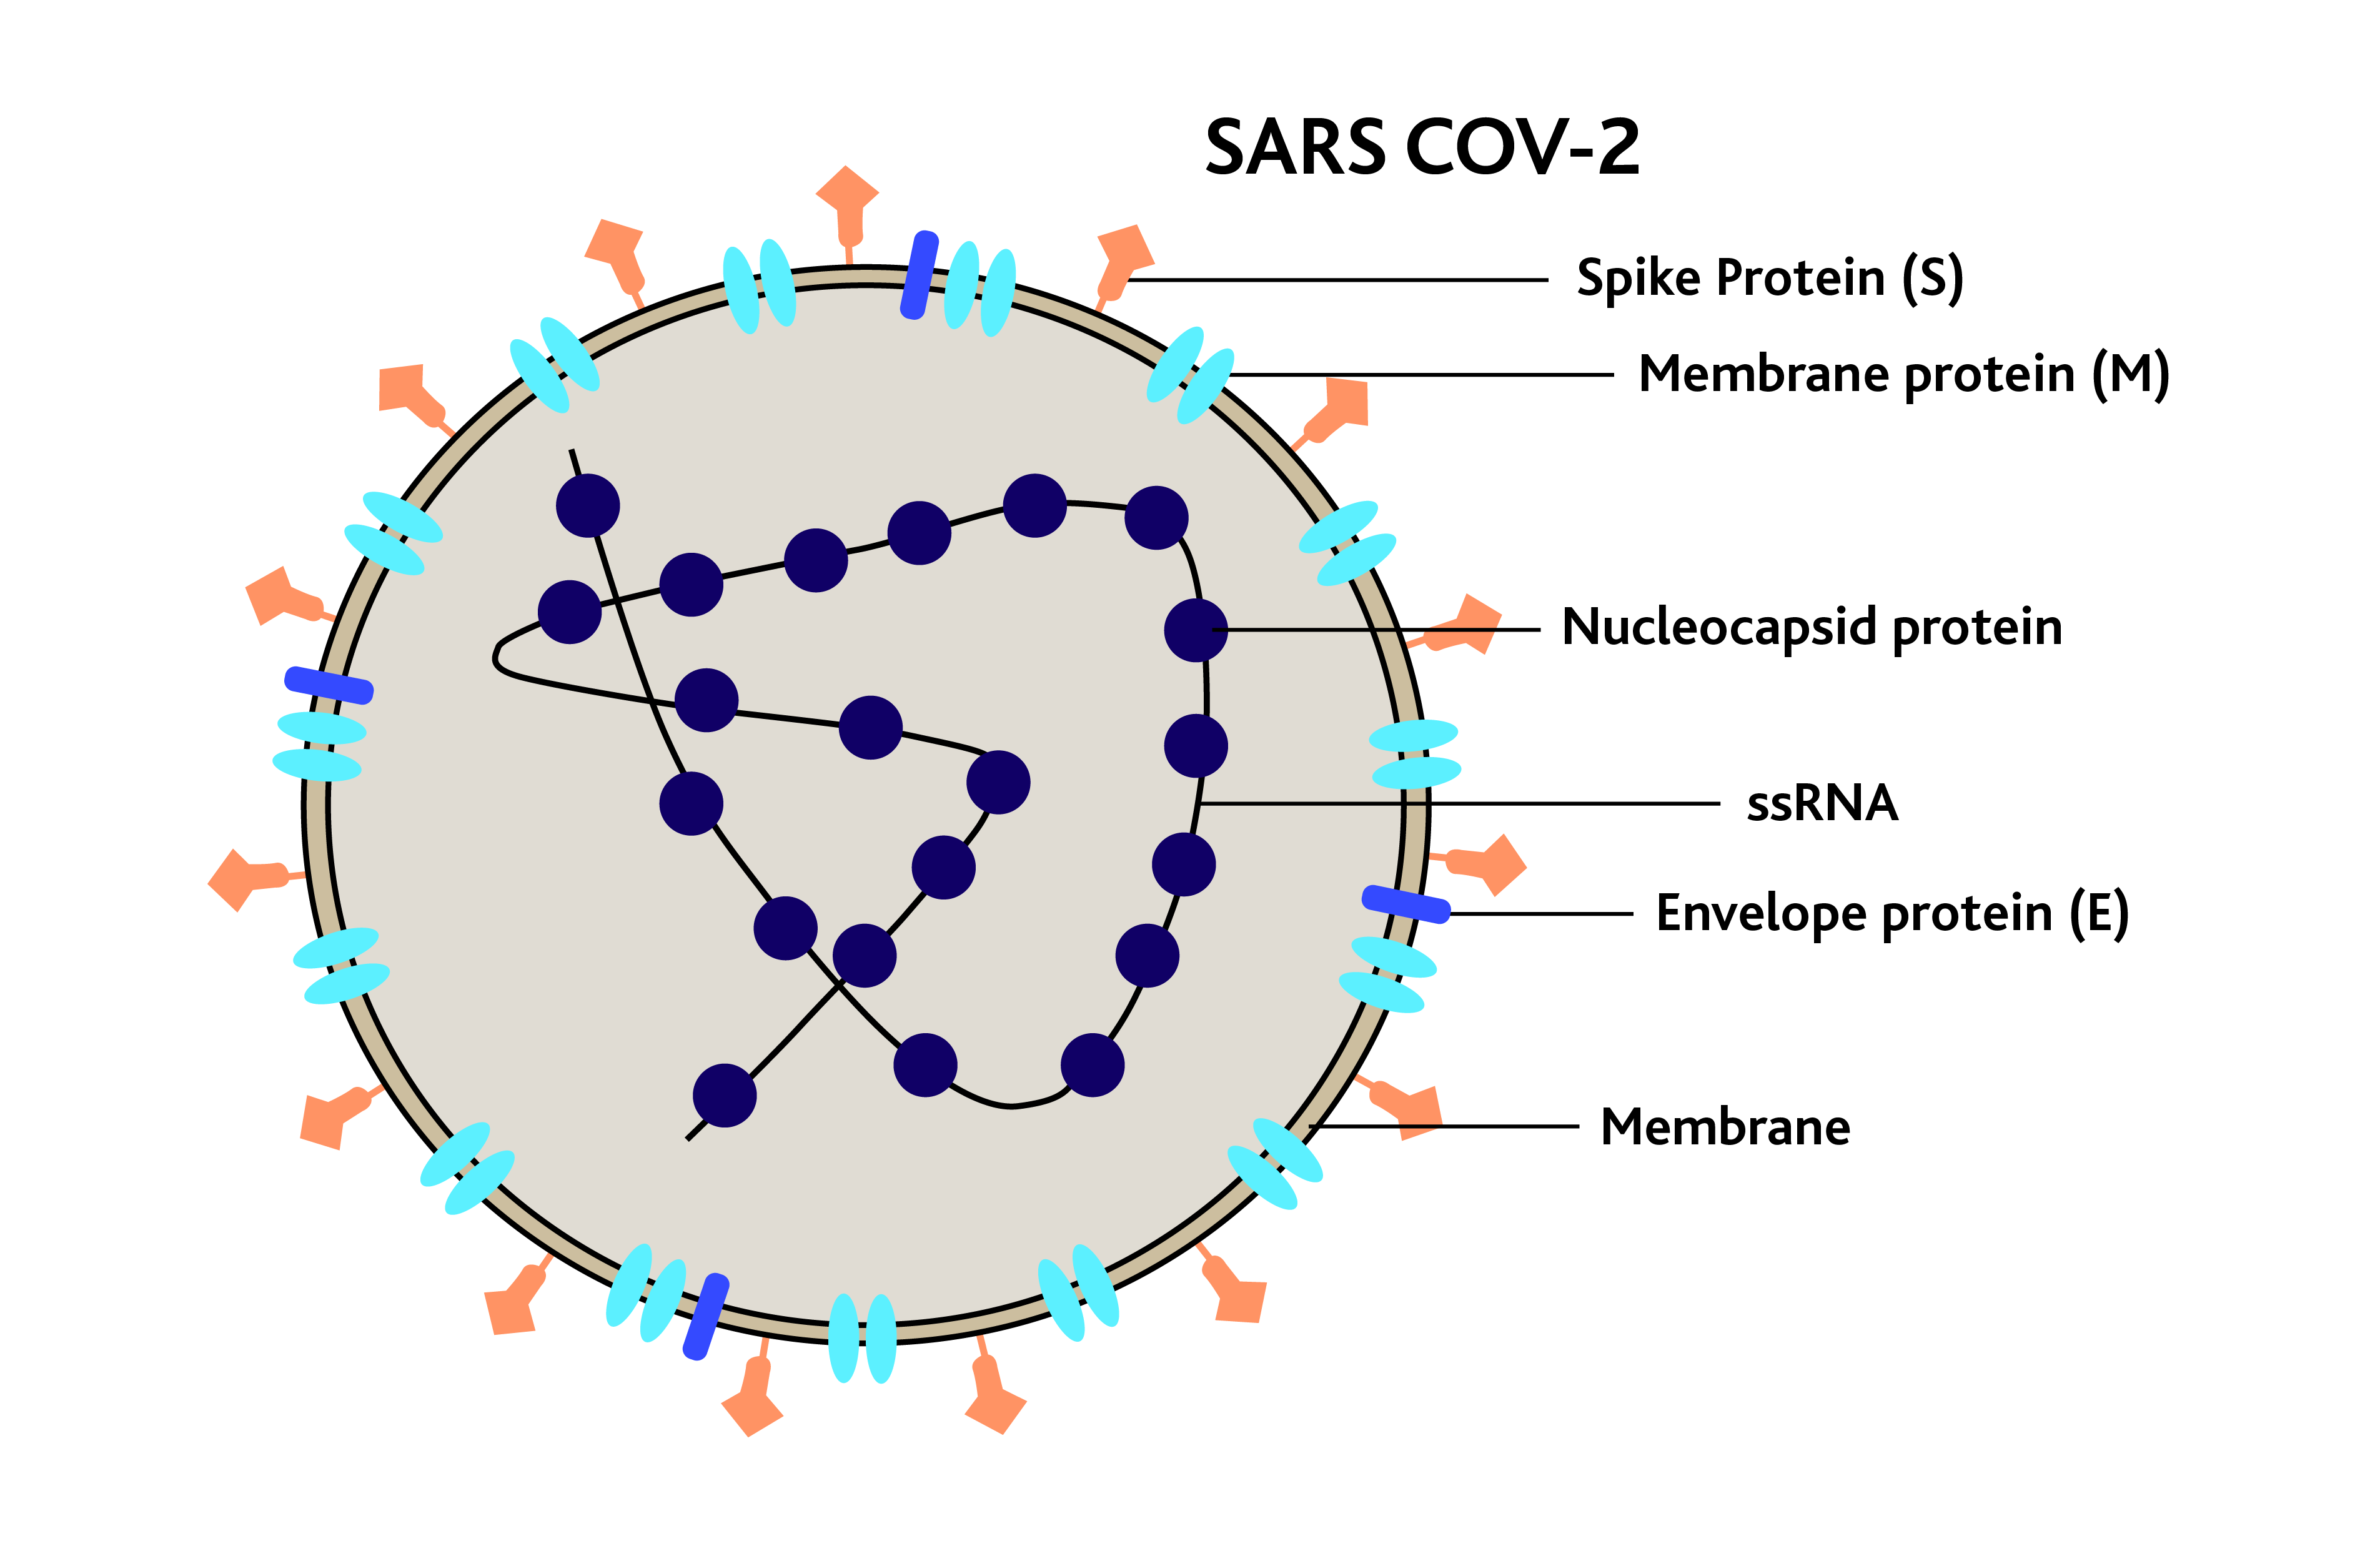 The SARS COV-2 Cell